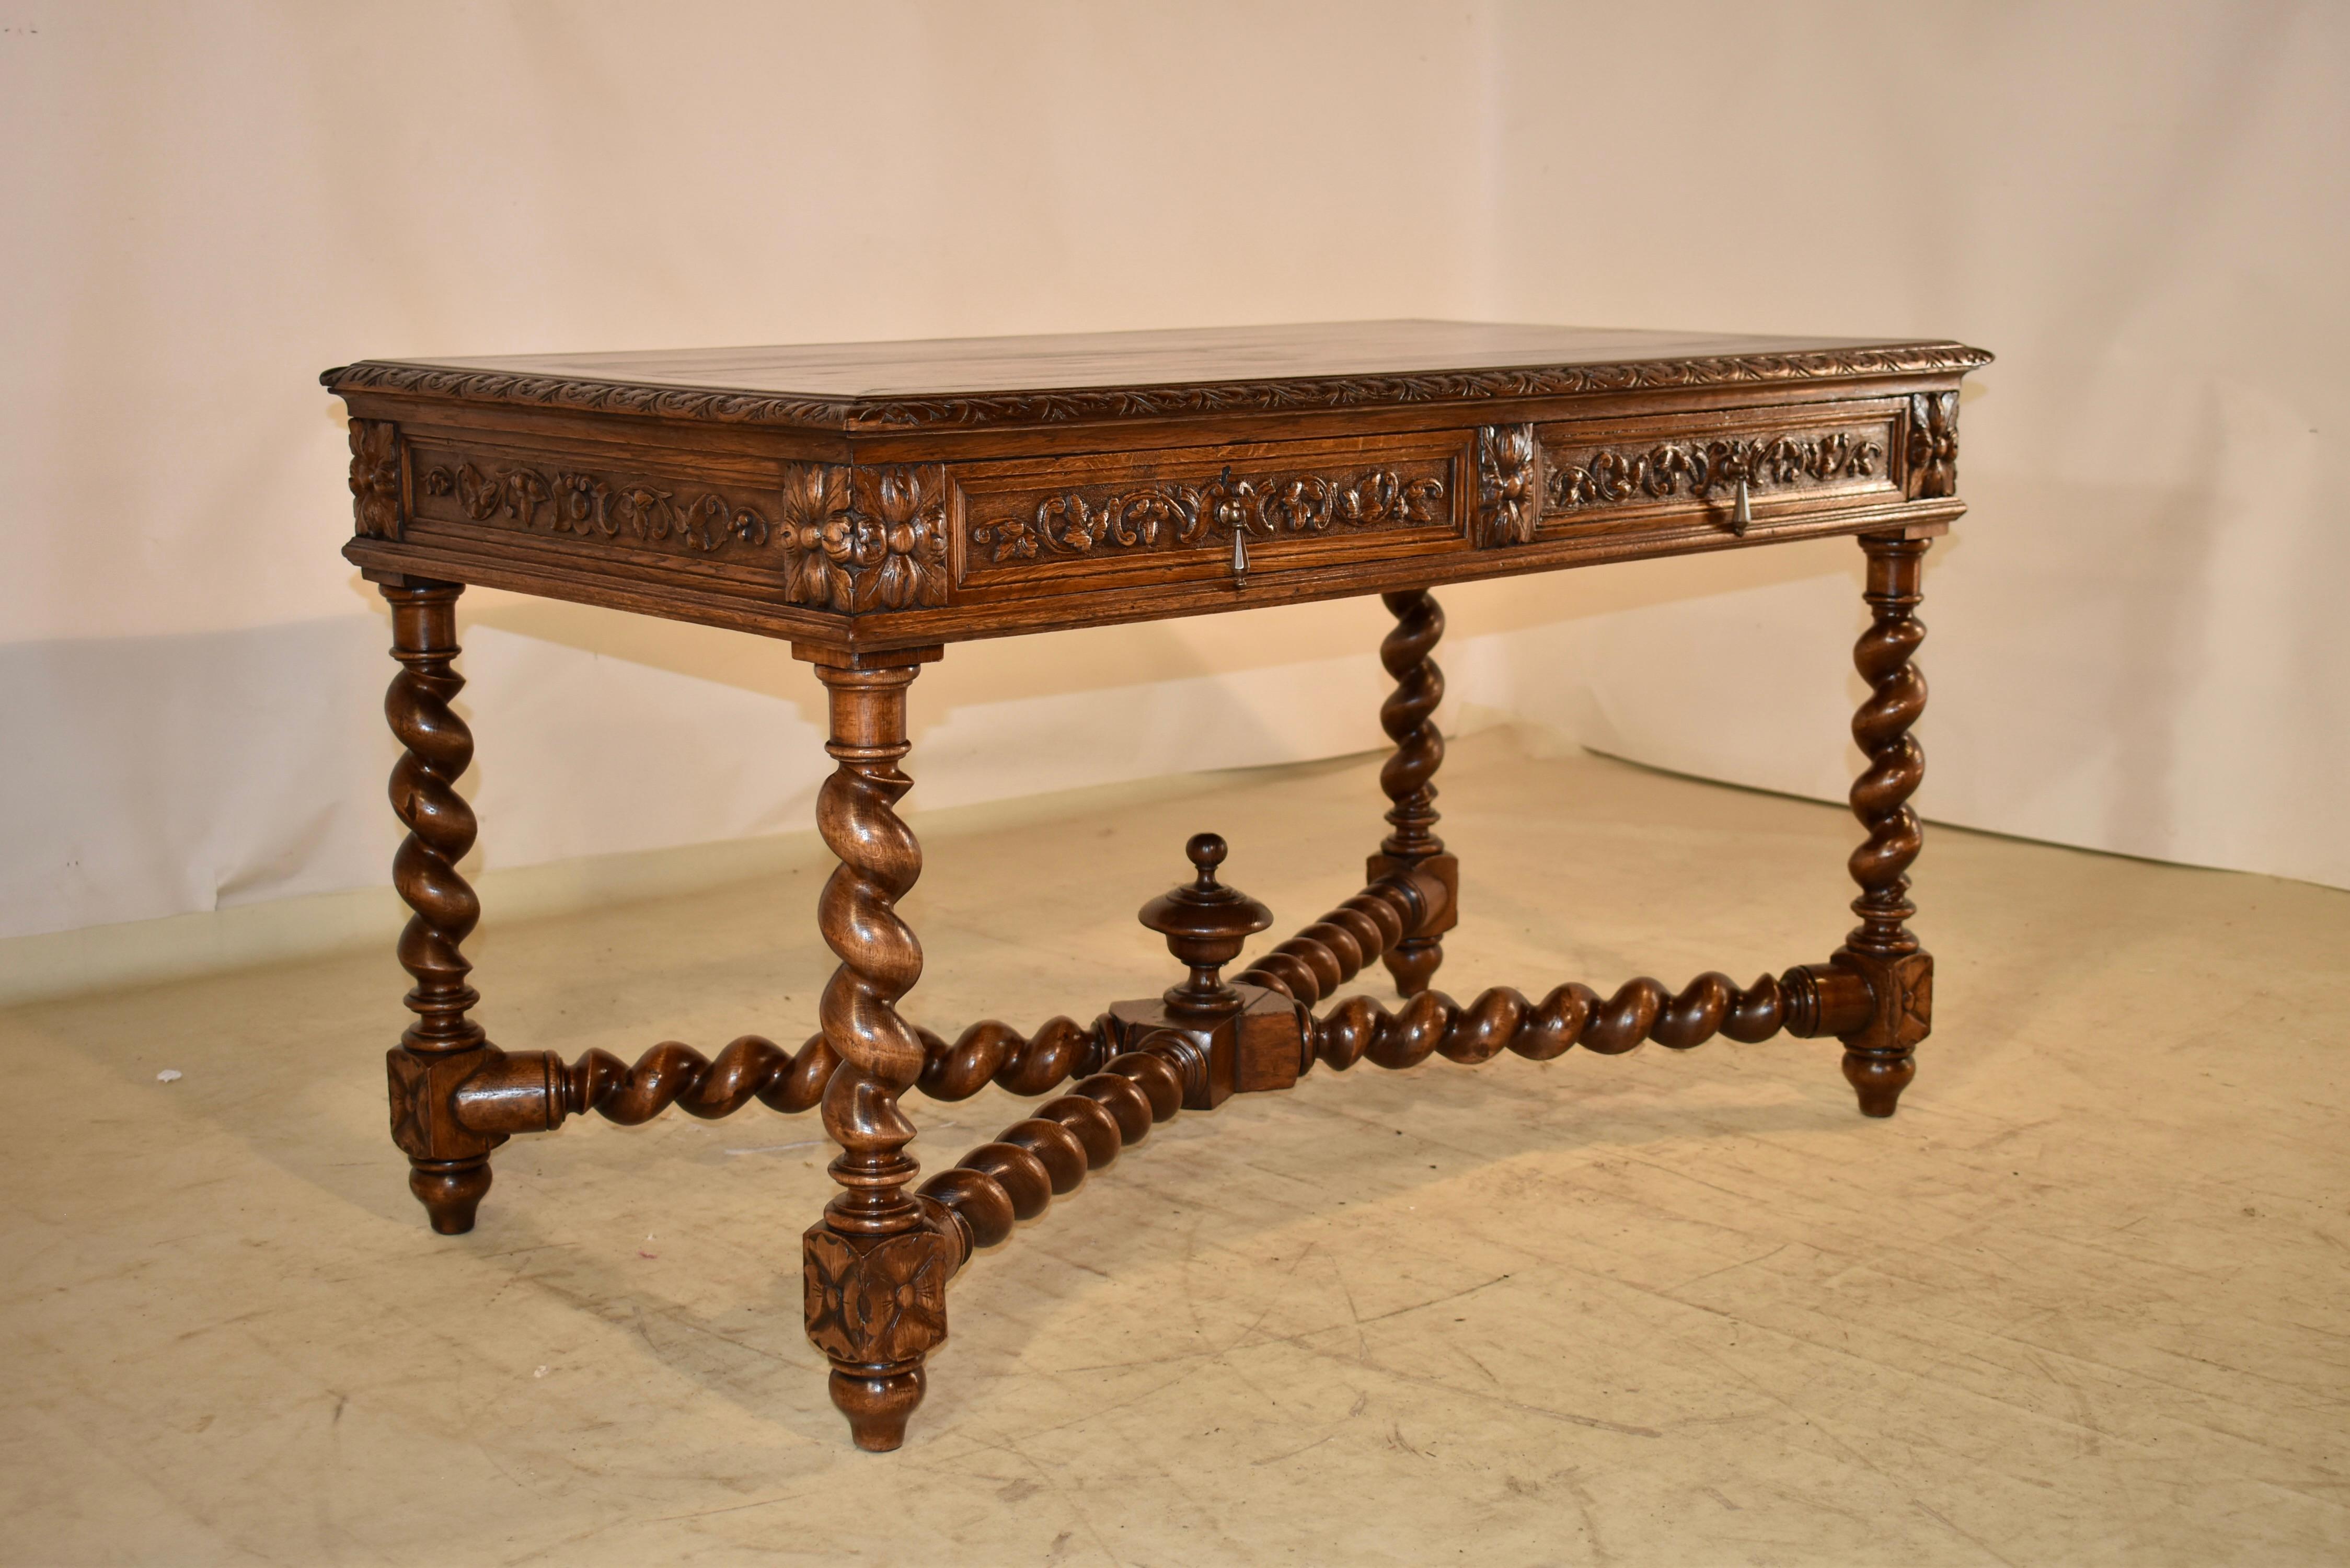 19th century oak desk from France.  The top is beautifully grained and has banding.  The top is finished with a beveled and carved edge.  The apron is paneled and hand carved decorated on all four sides, for easy placement in any room.  In the front